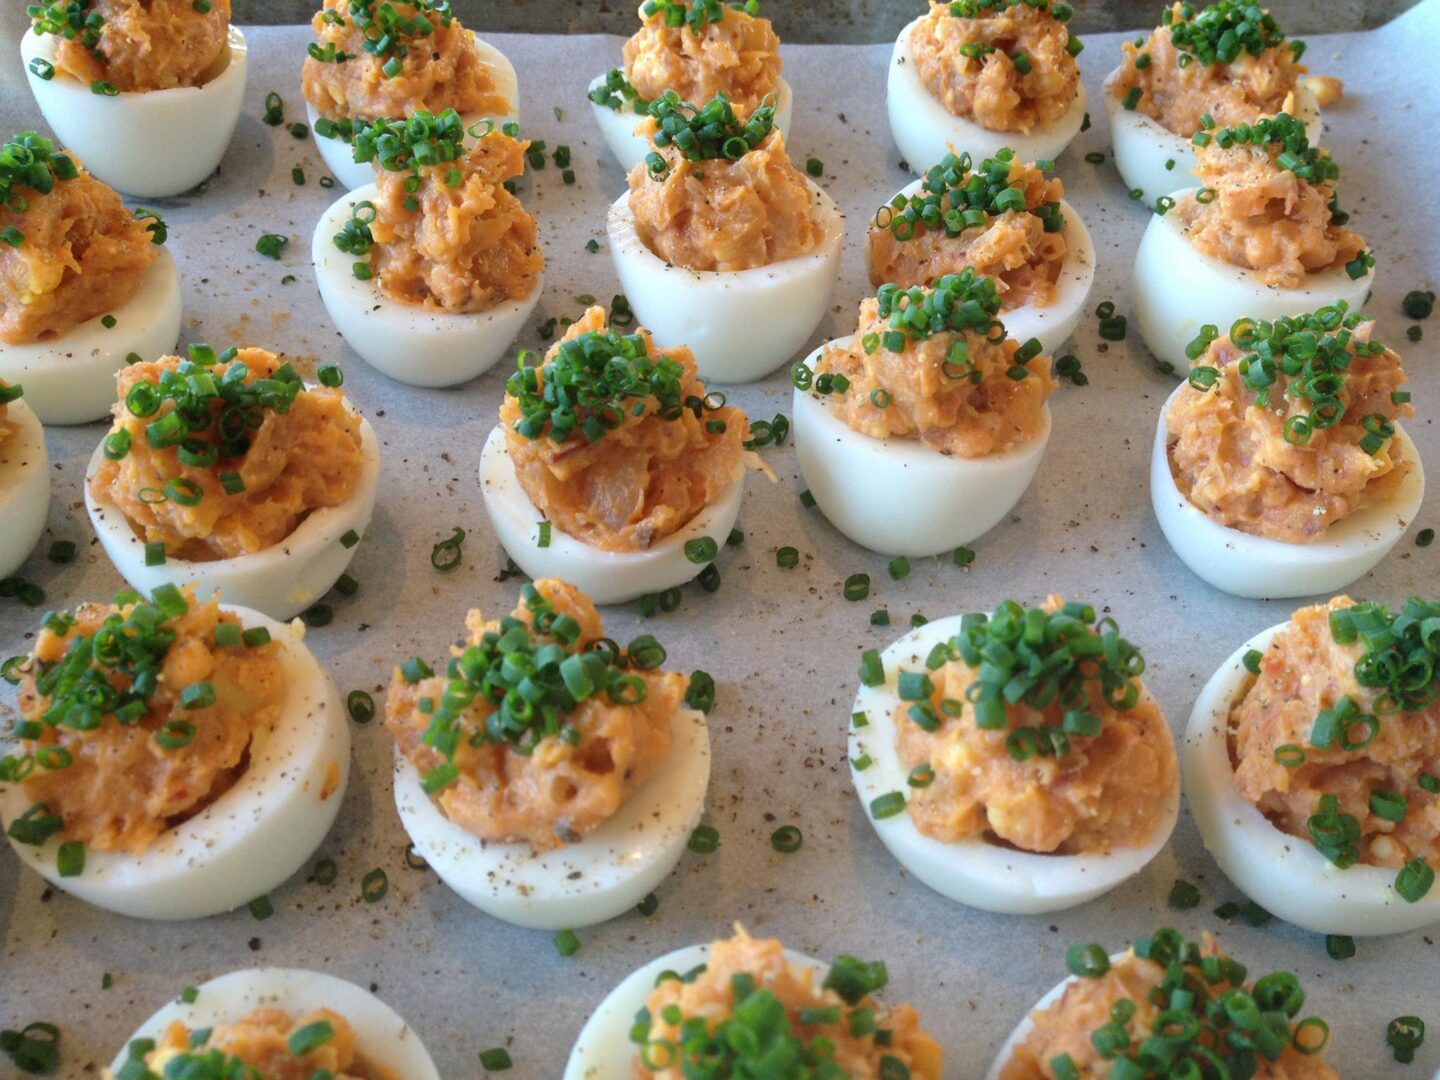 Deviled eggs on a baking sheet with chives.